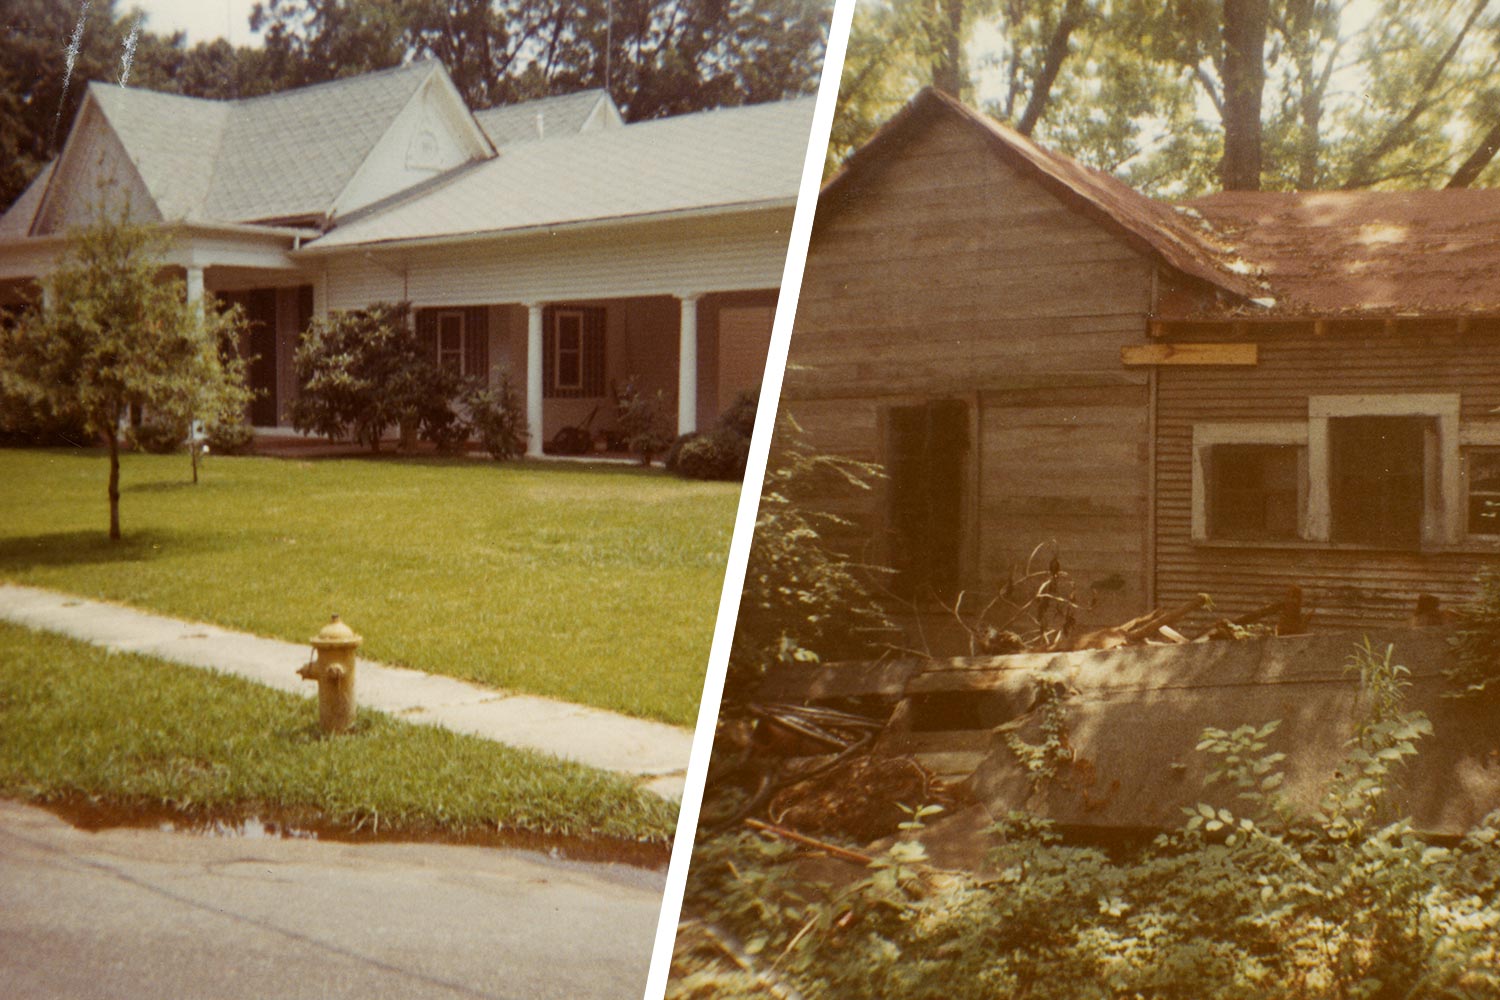 Left: One story home of Zeith Tupperfield in Edwards, Mississippi Right: the worn down one story home of Sam Jordan a black resident in Edwards